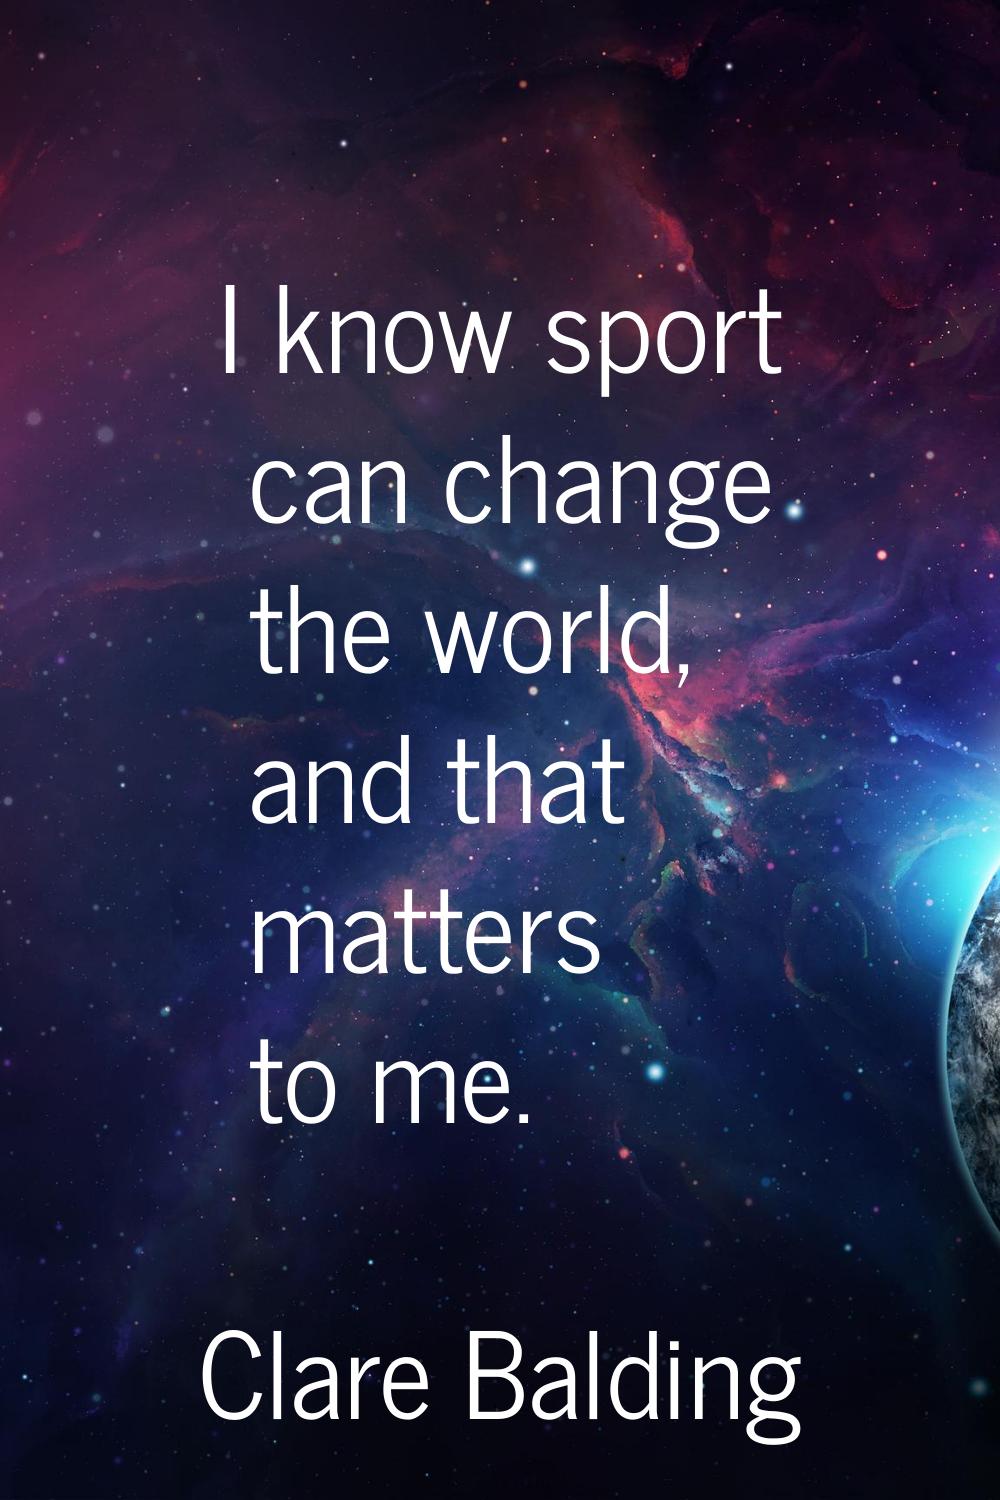 I know sport can change the world, and that matters to me.